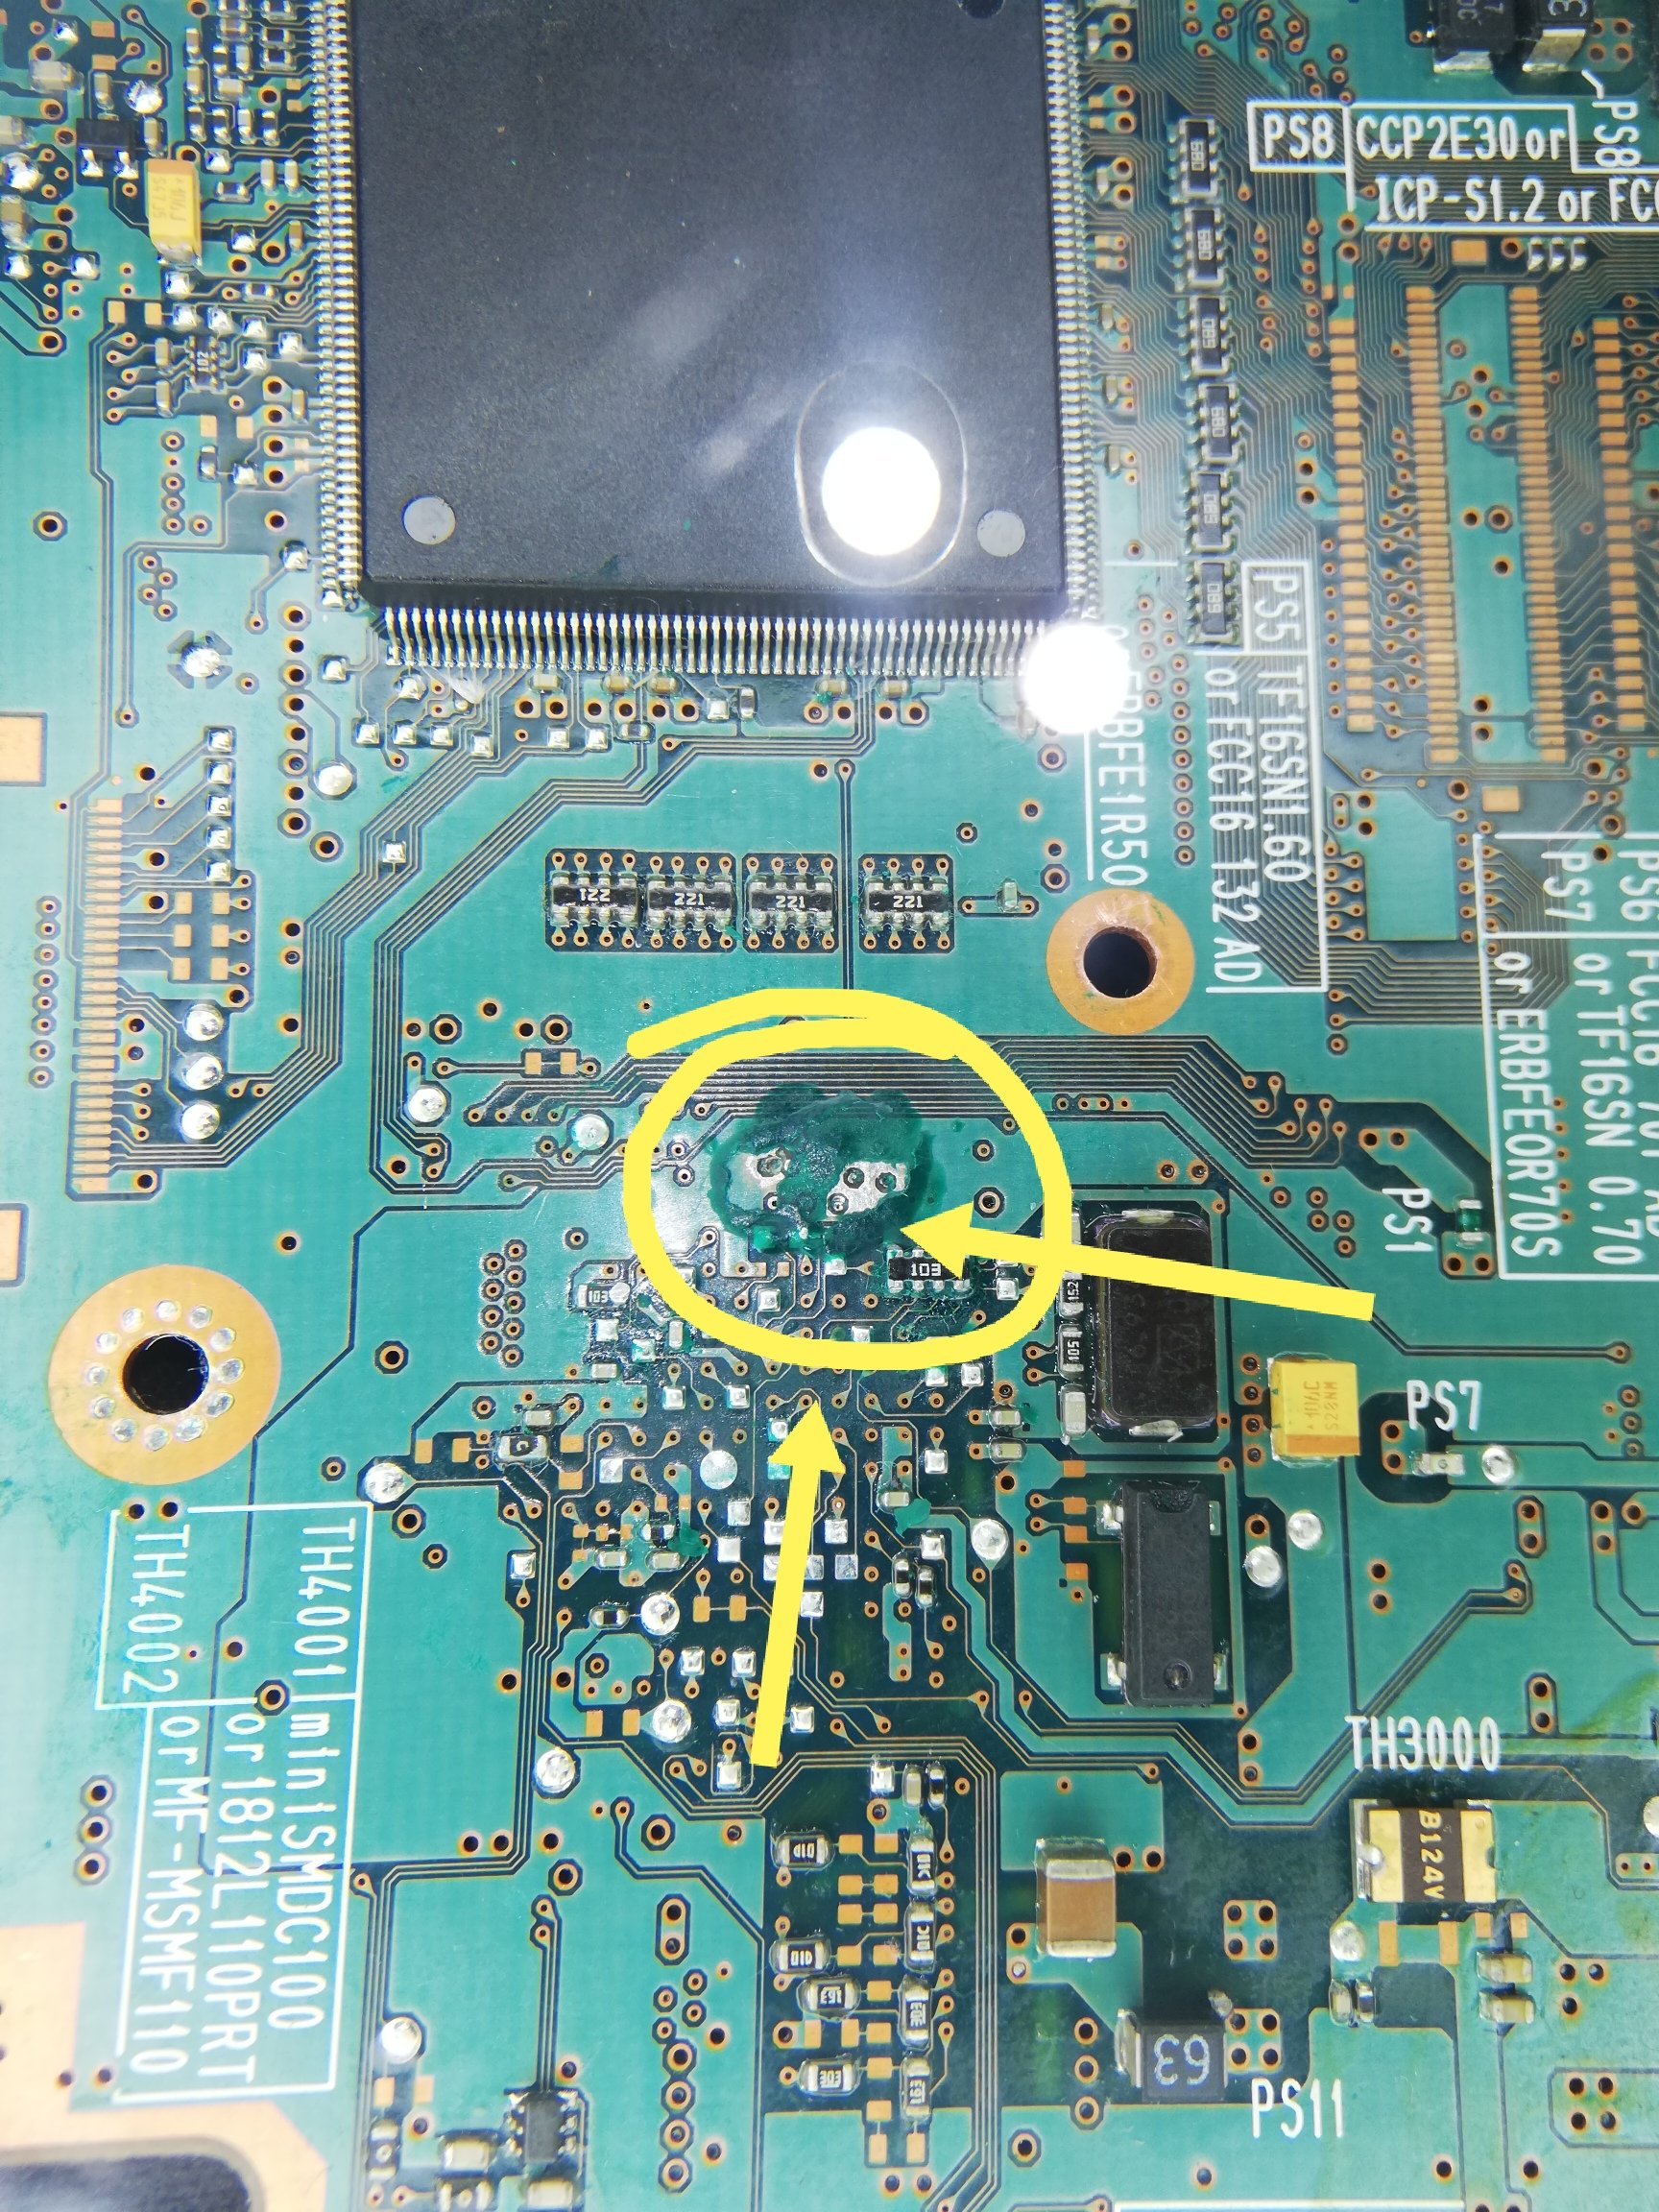 PS2 modchip installation but solder mask has scraped away... | GBAtemp.net  - The Independent Video Game Community